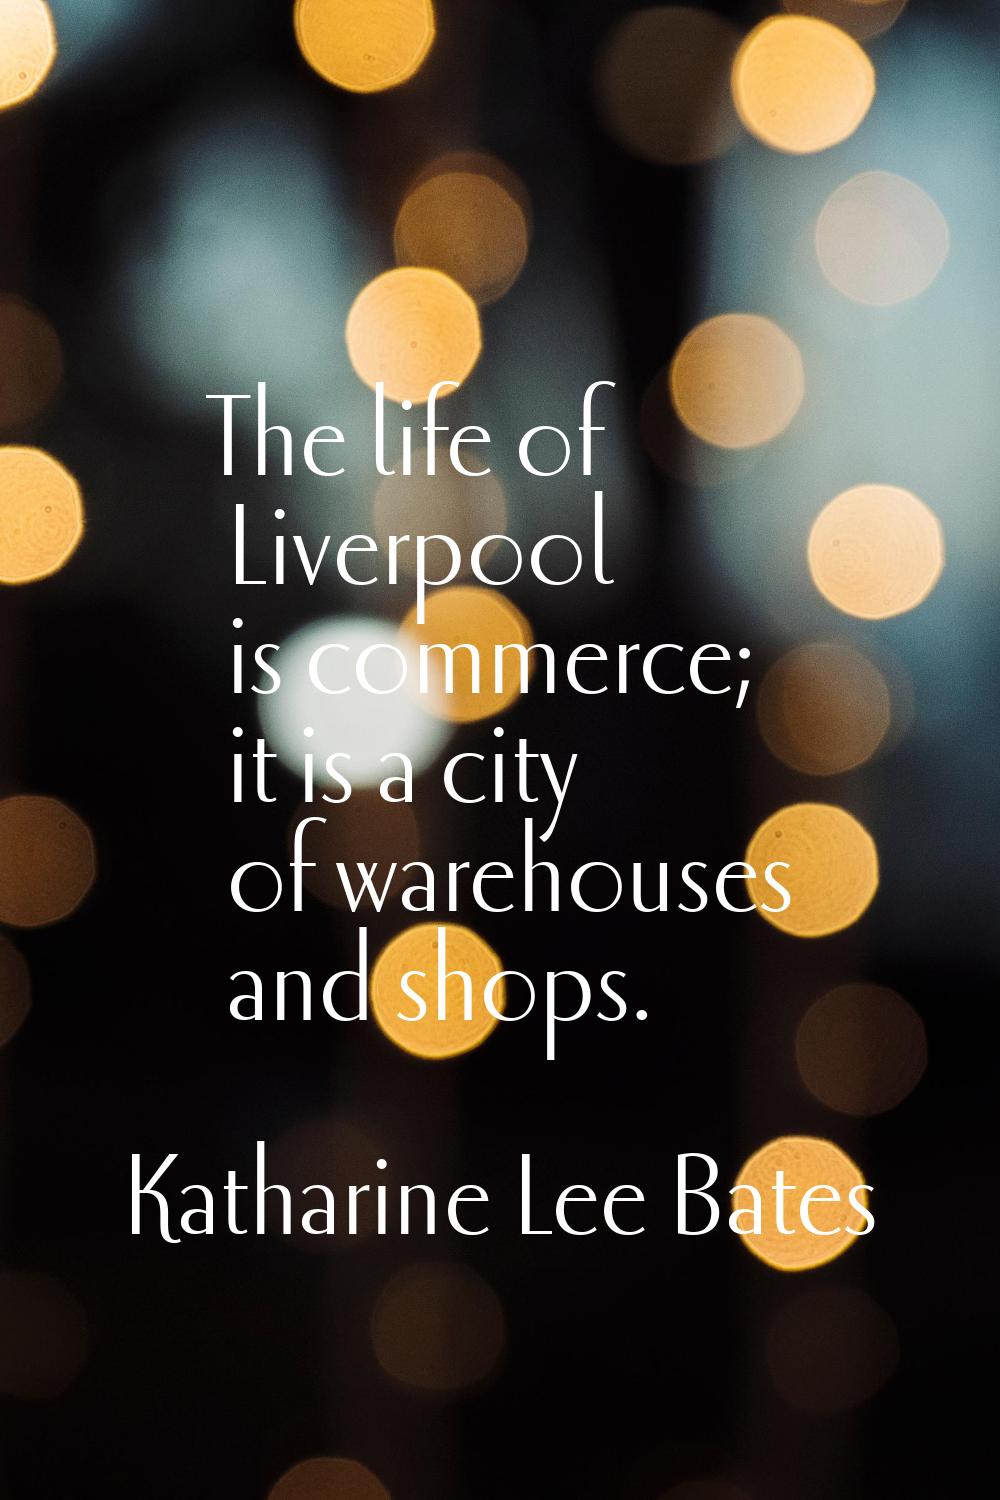 The life of Liverpool is commerce; it is a city of warehouses and shops.